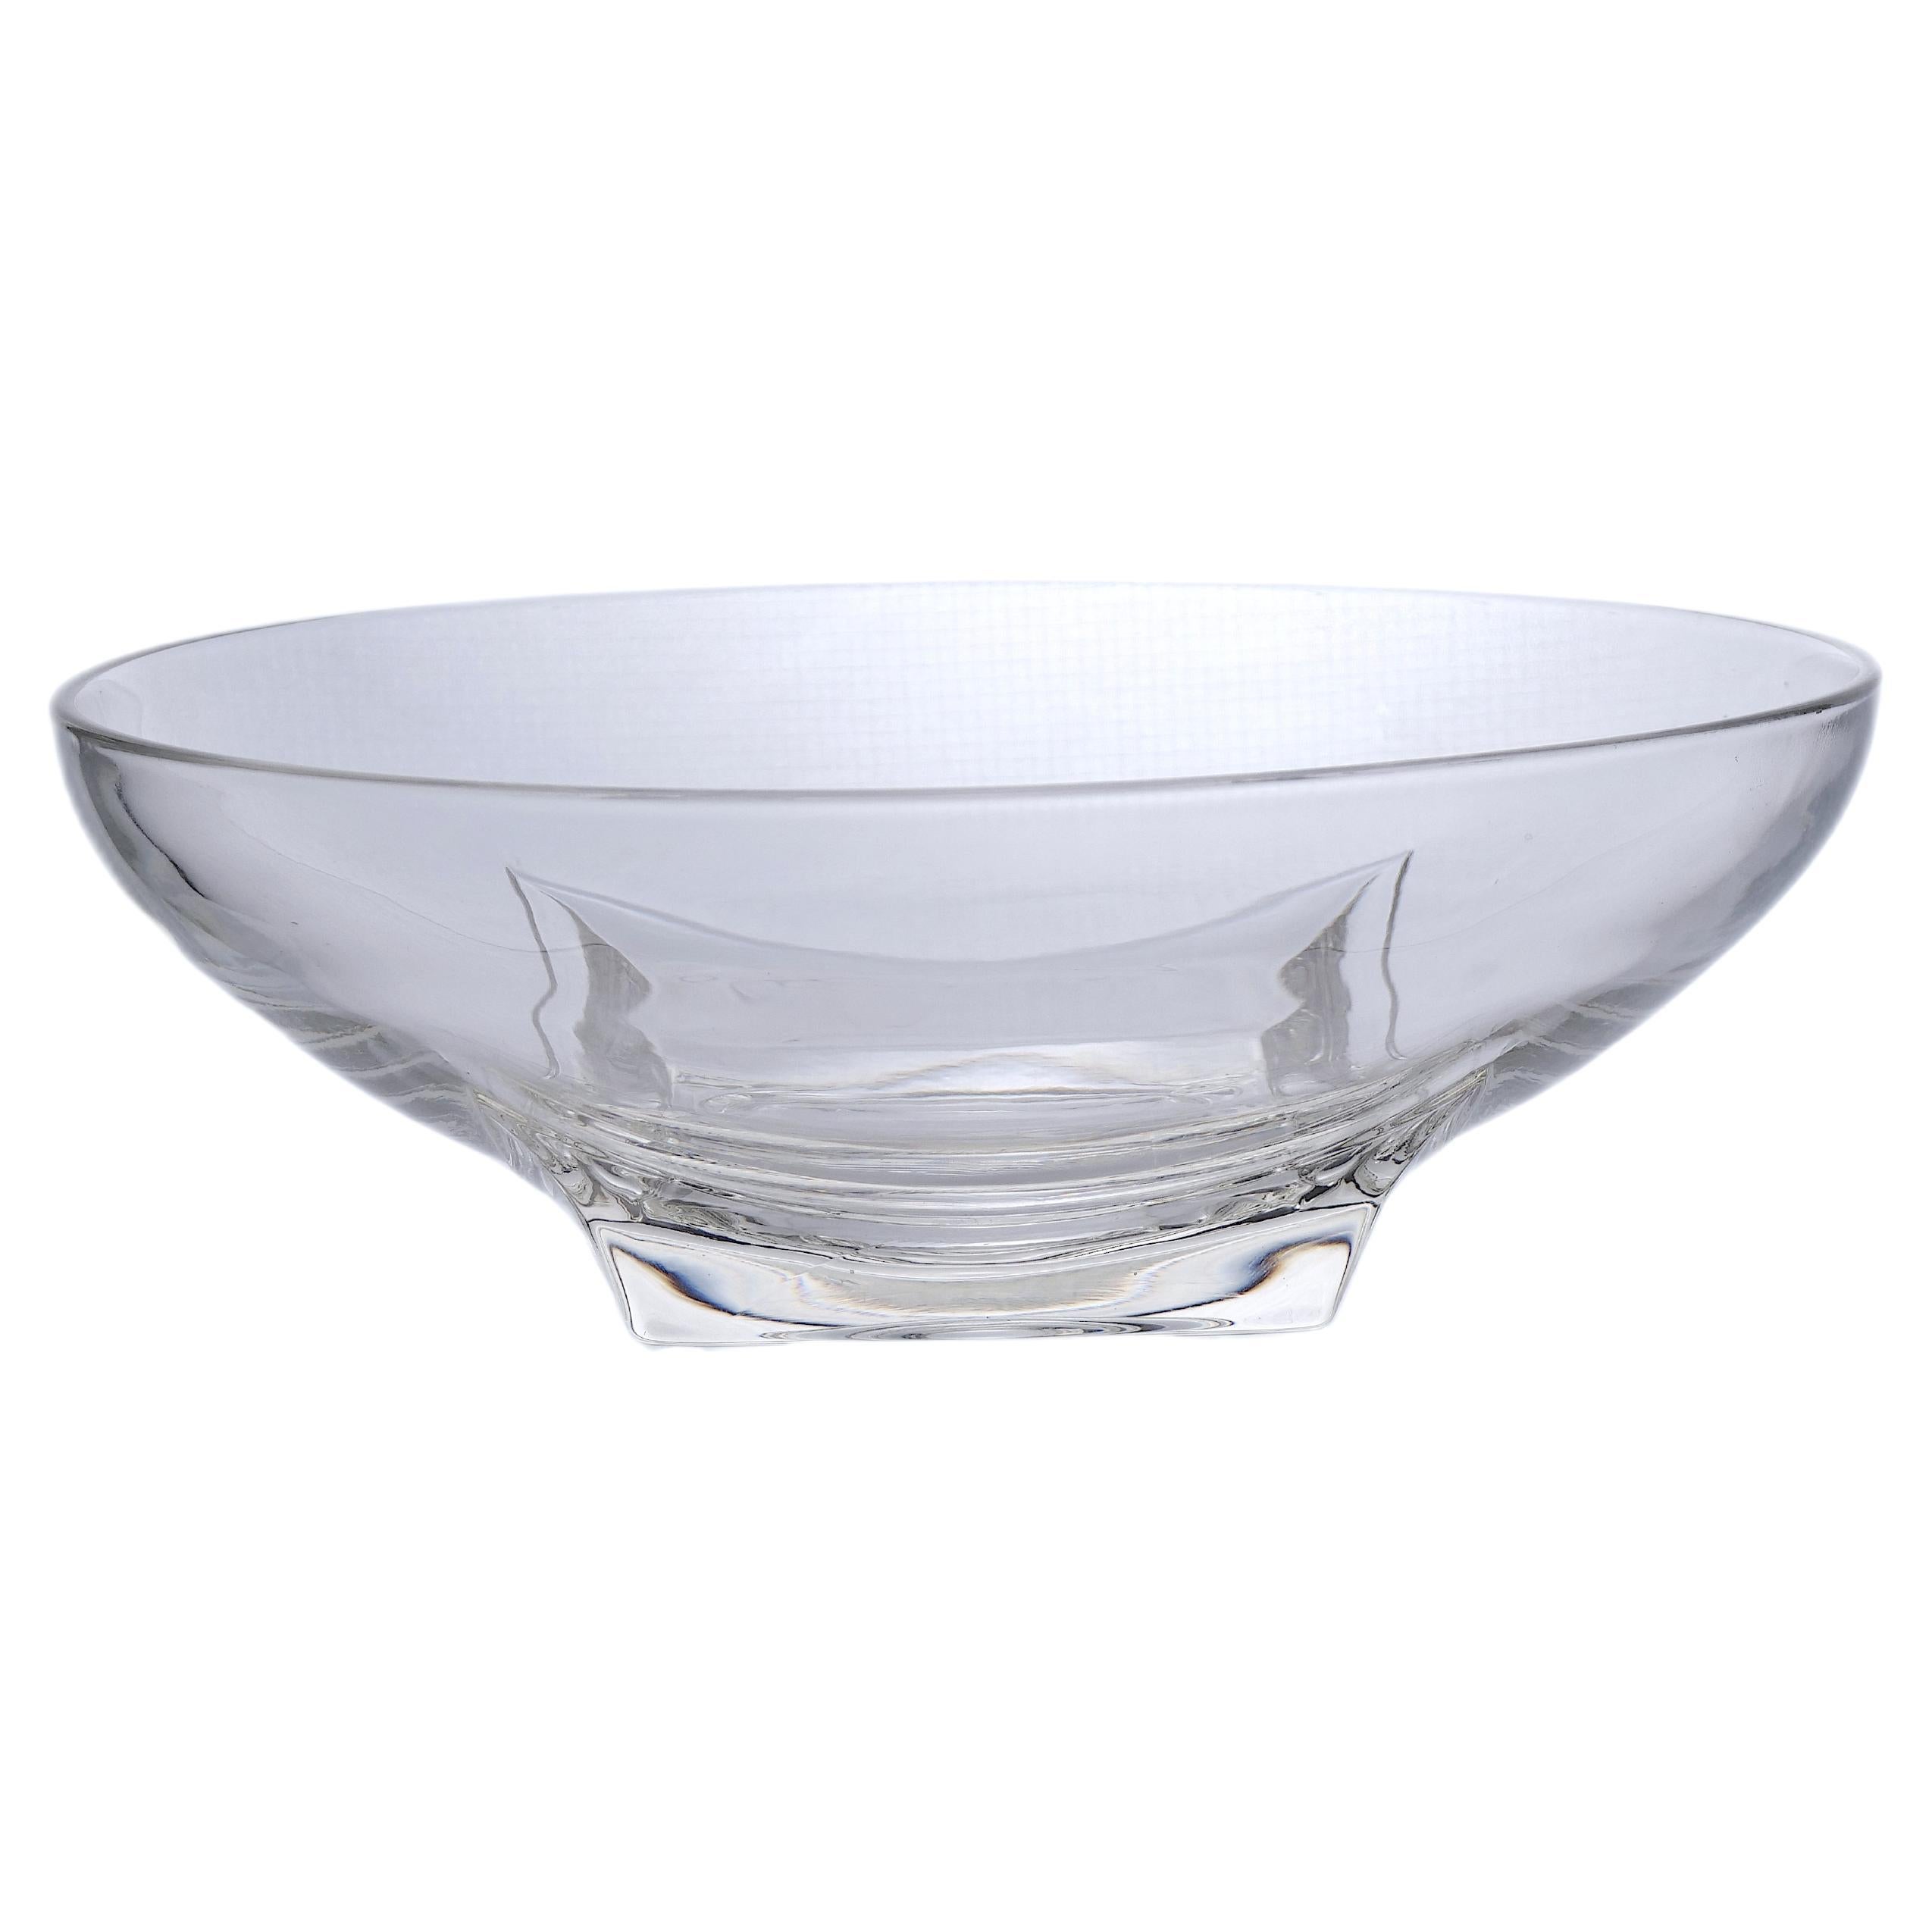 French Mid-Century Modern Art Deco Style Glass Centerpiece Bowl For Sale